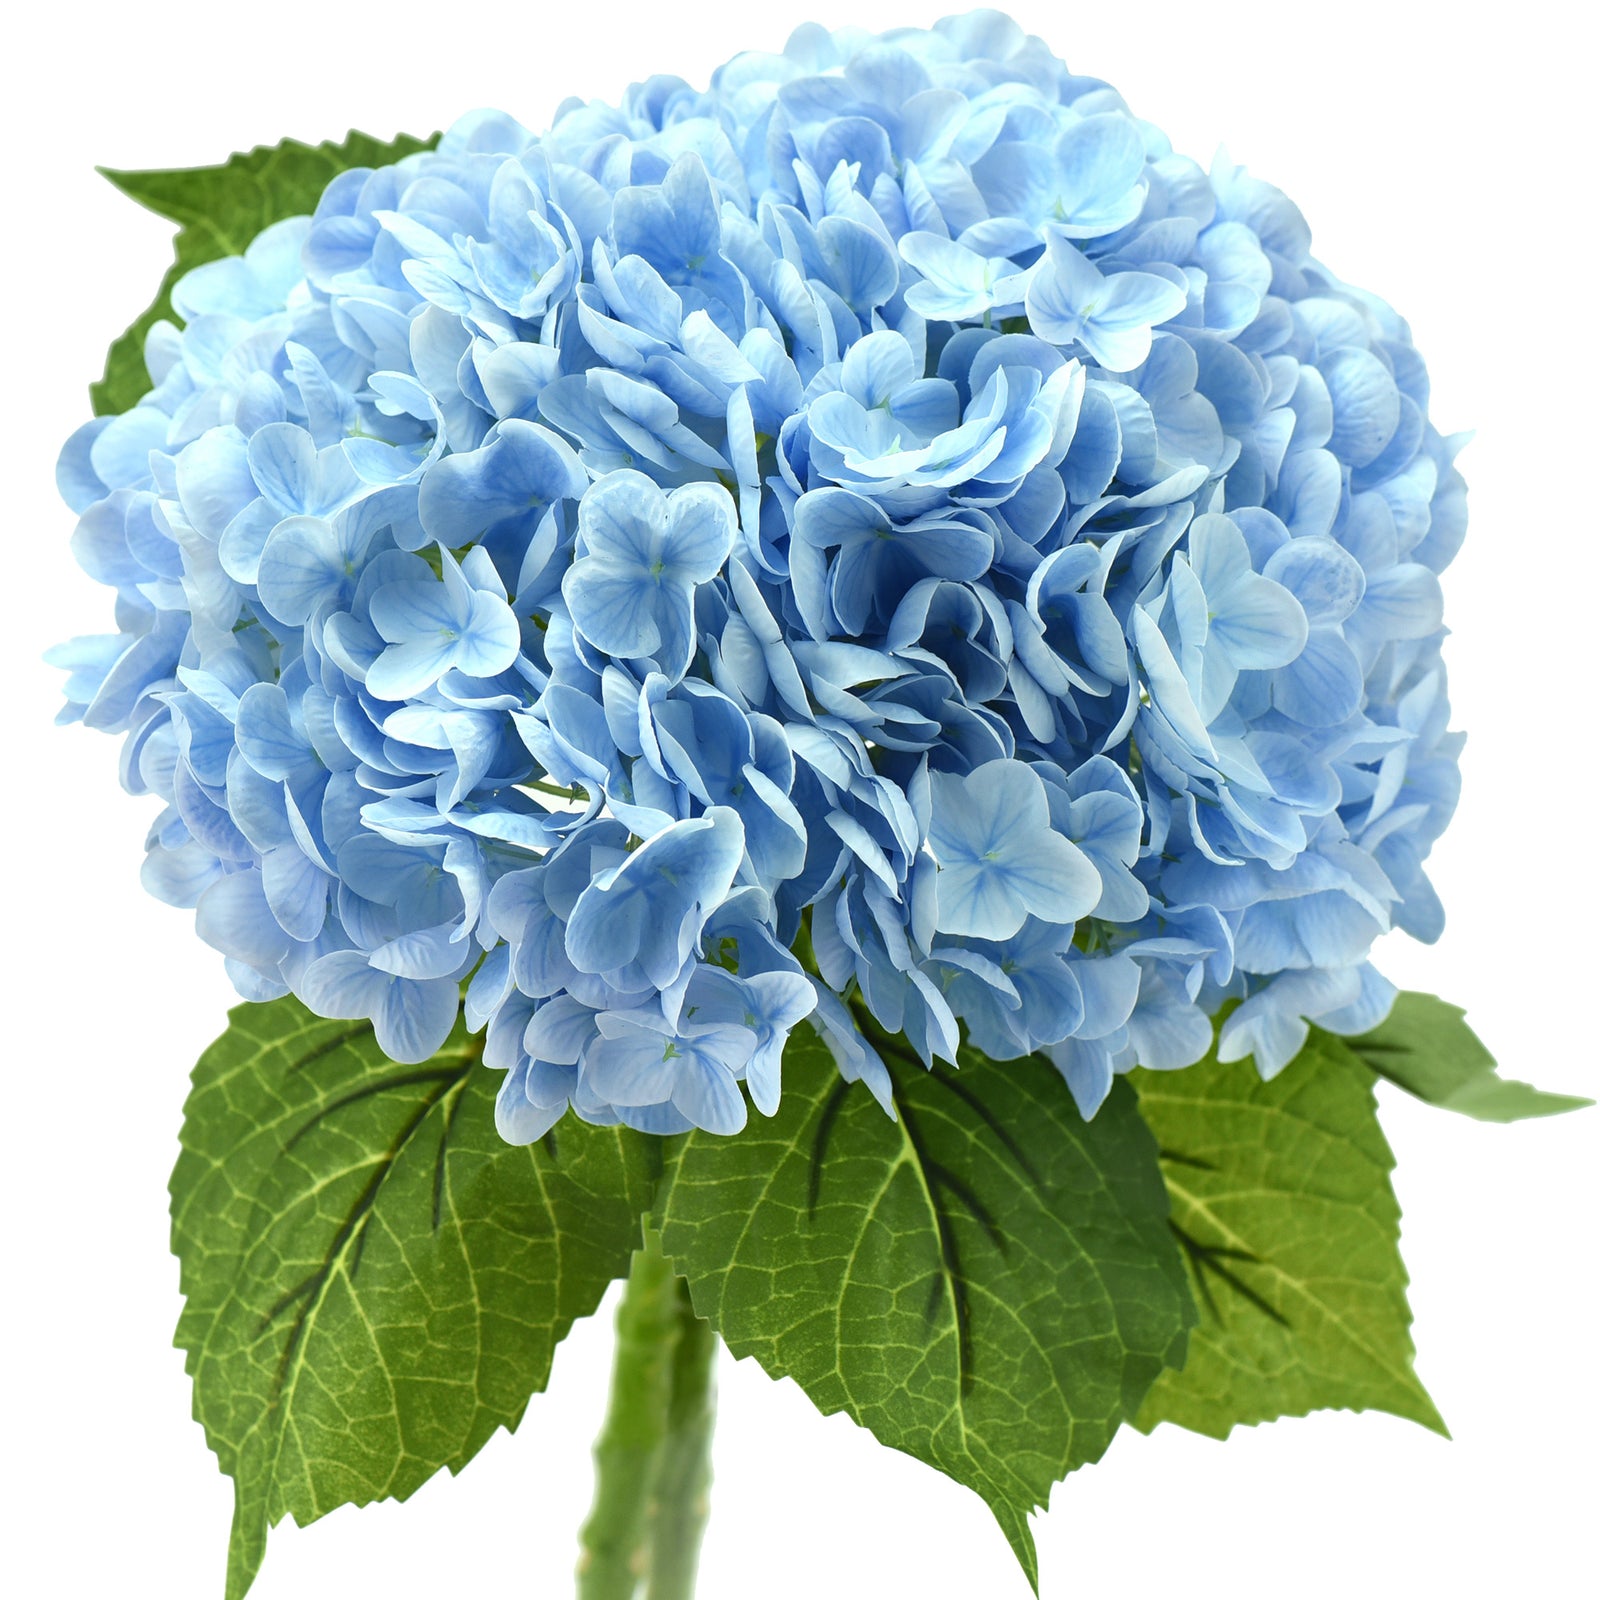 FiveSeasonStuff 2 Stems Real Touch Petals and Leaves Artificial Hydrangea Flowers Long Stem Floral Arrangement | for Wedding Bridal Party Home Décor DIY Floral Decoration (FiveSeasonStuff 2 Stems Real Touch Petals and Leaves Artificial Hydrangea Flowers Long Stem Floral Arrangement | for Wedding Bridal Party Home Décor DIY Floral Decoration (blue)